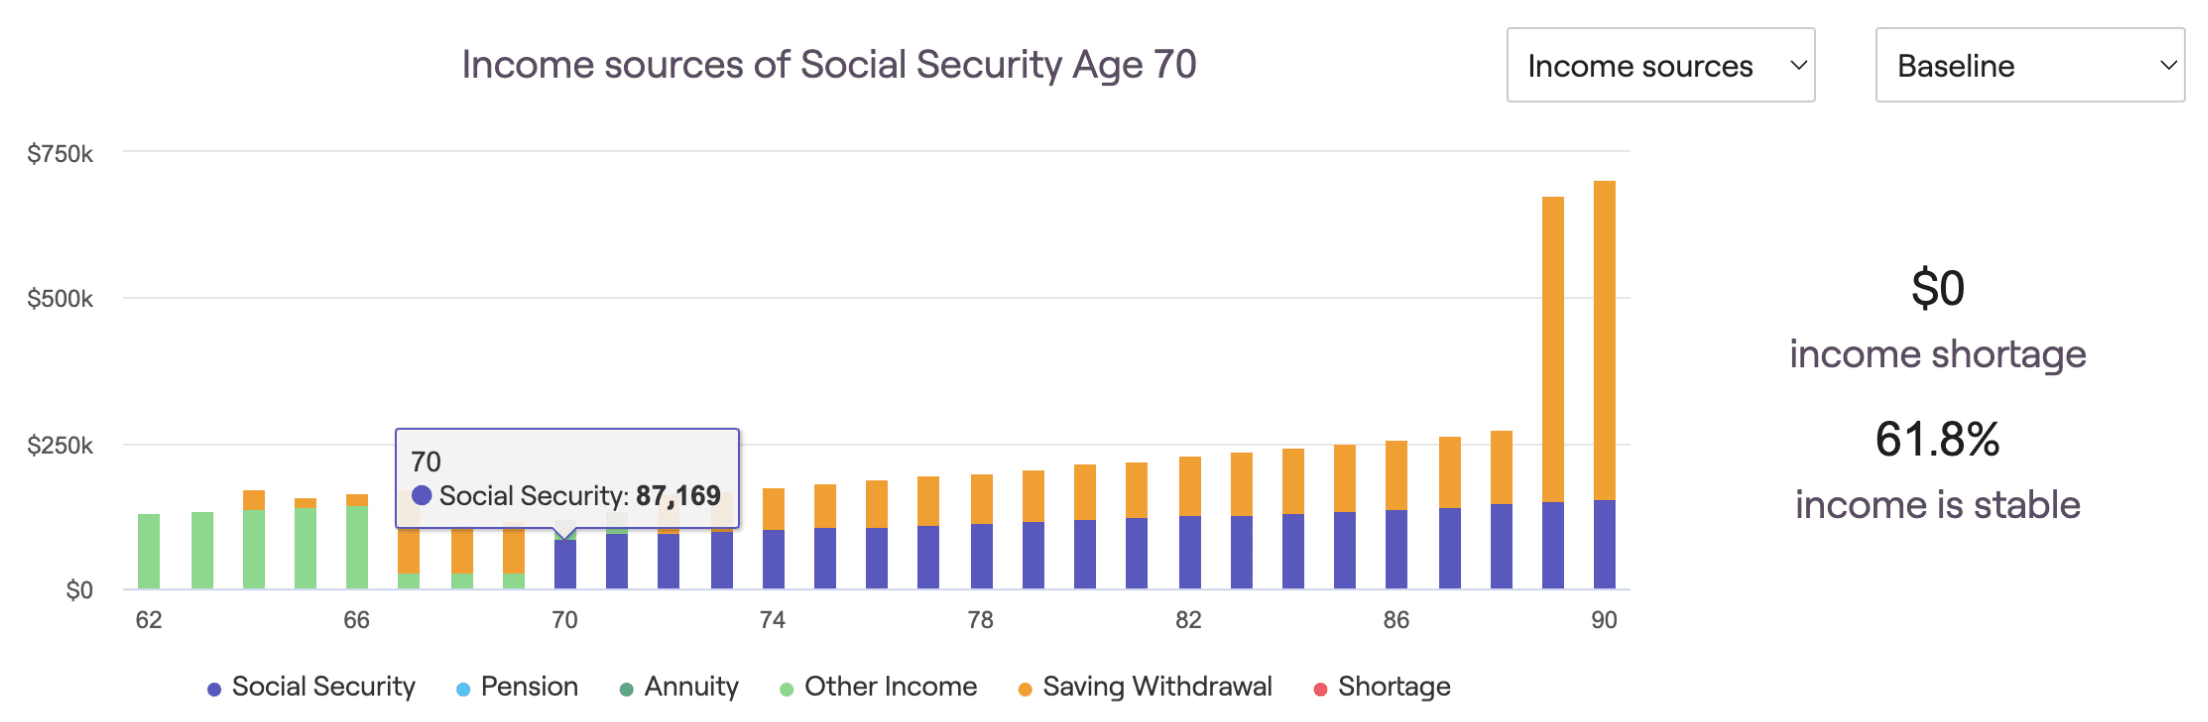 Delaying social security benefits until age 70